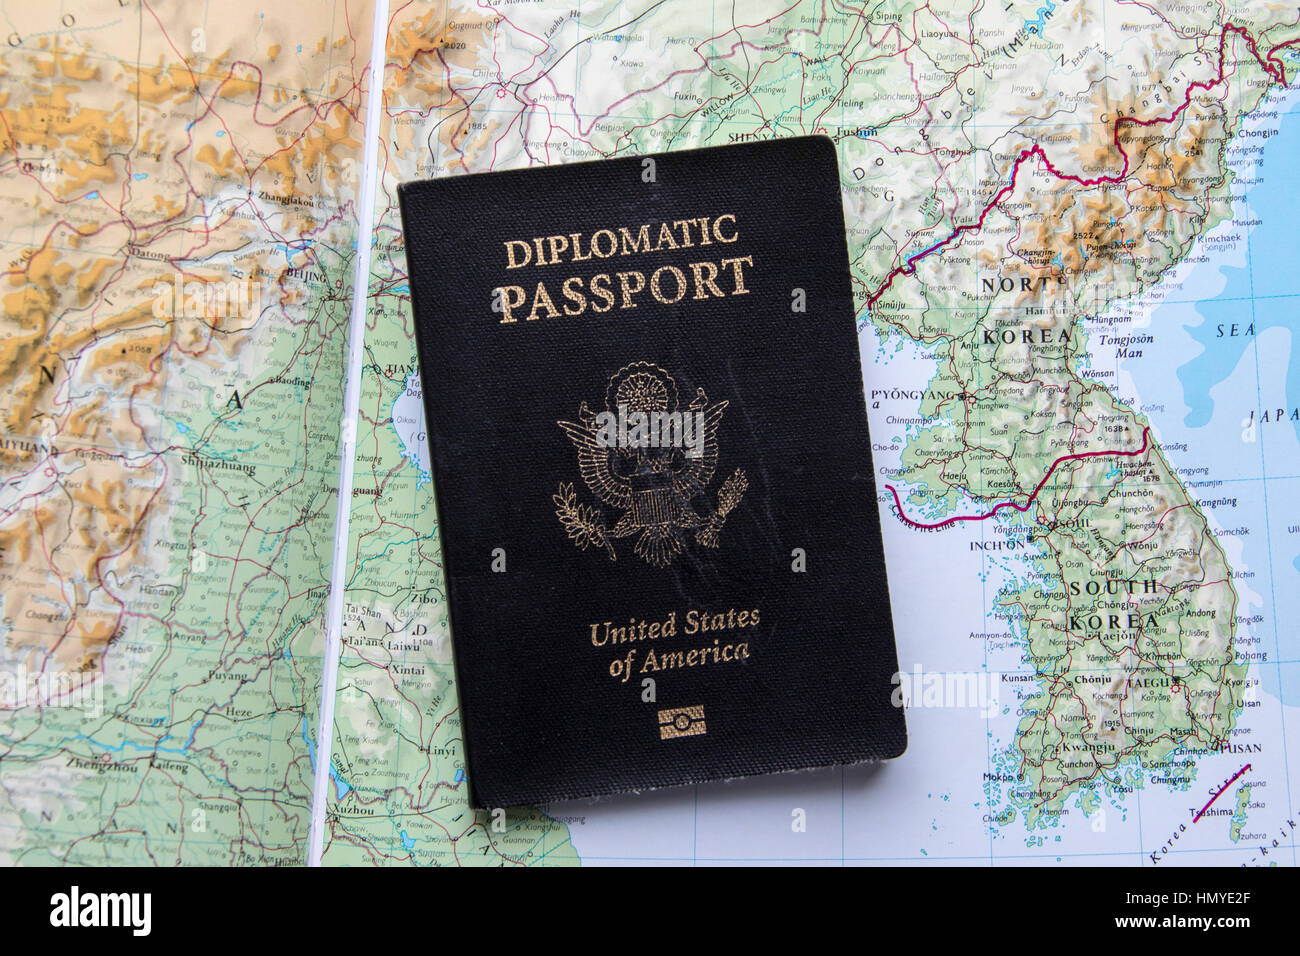 Diplomatic passport of the United States of America, on a map of North and South Korea Stock Photo